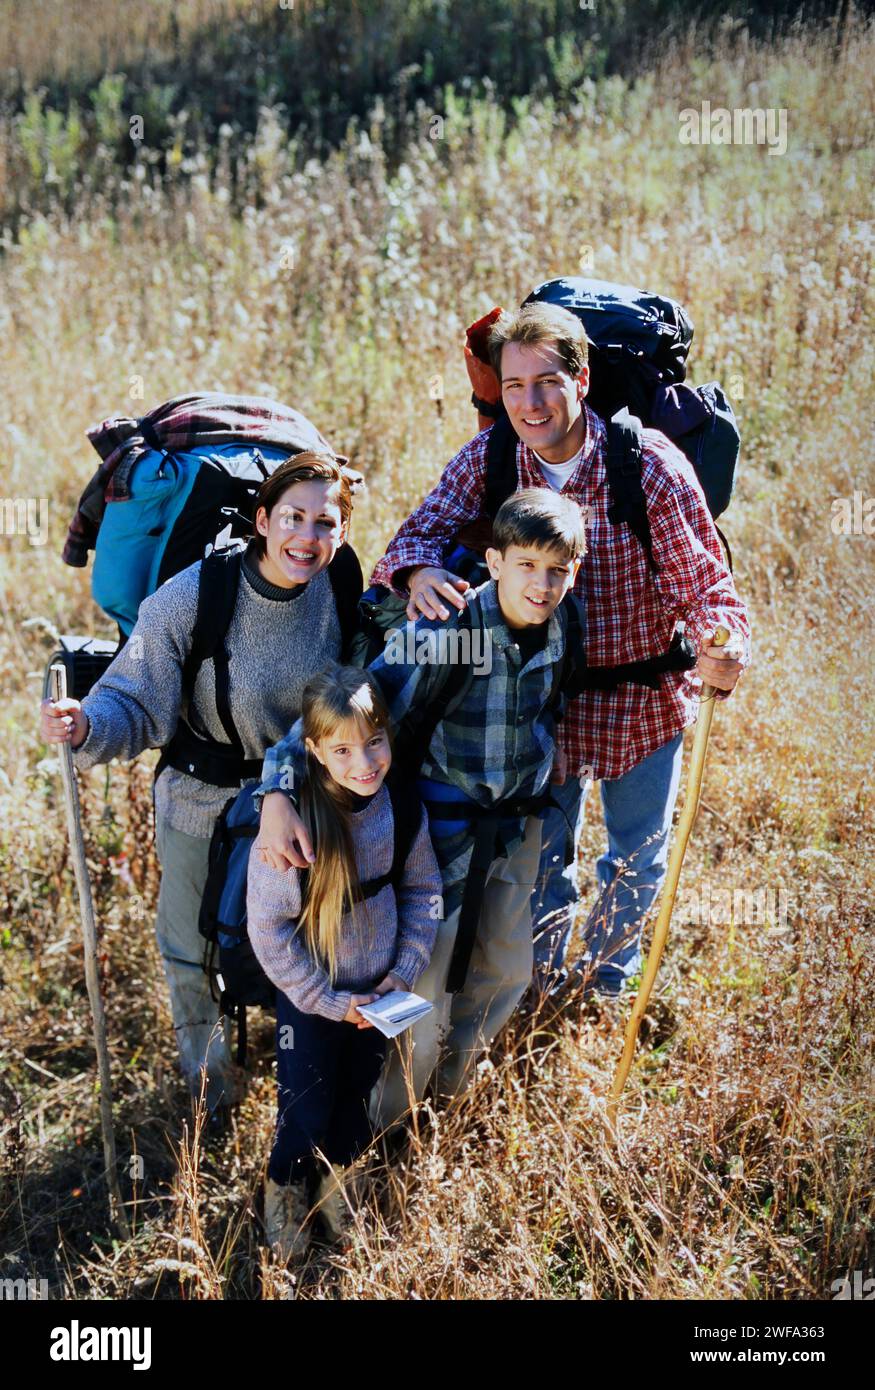 A Portrait of a happy family with two children and backpacks is smiling at the camera while hiking in a grassy field on a sunny autumn day. Stock Photo